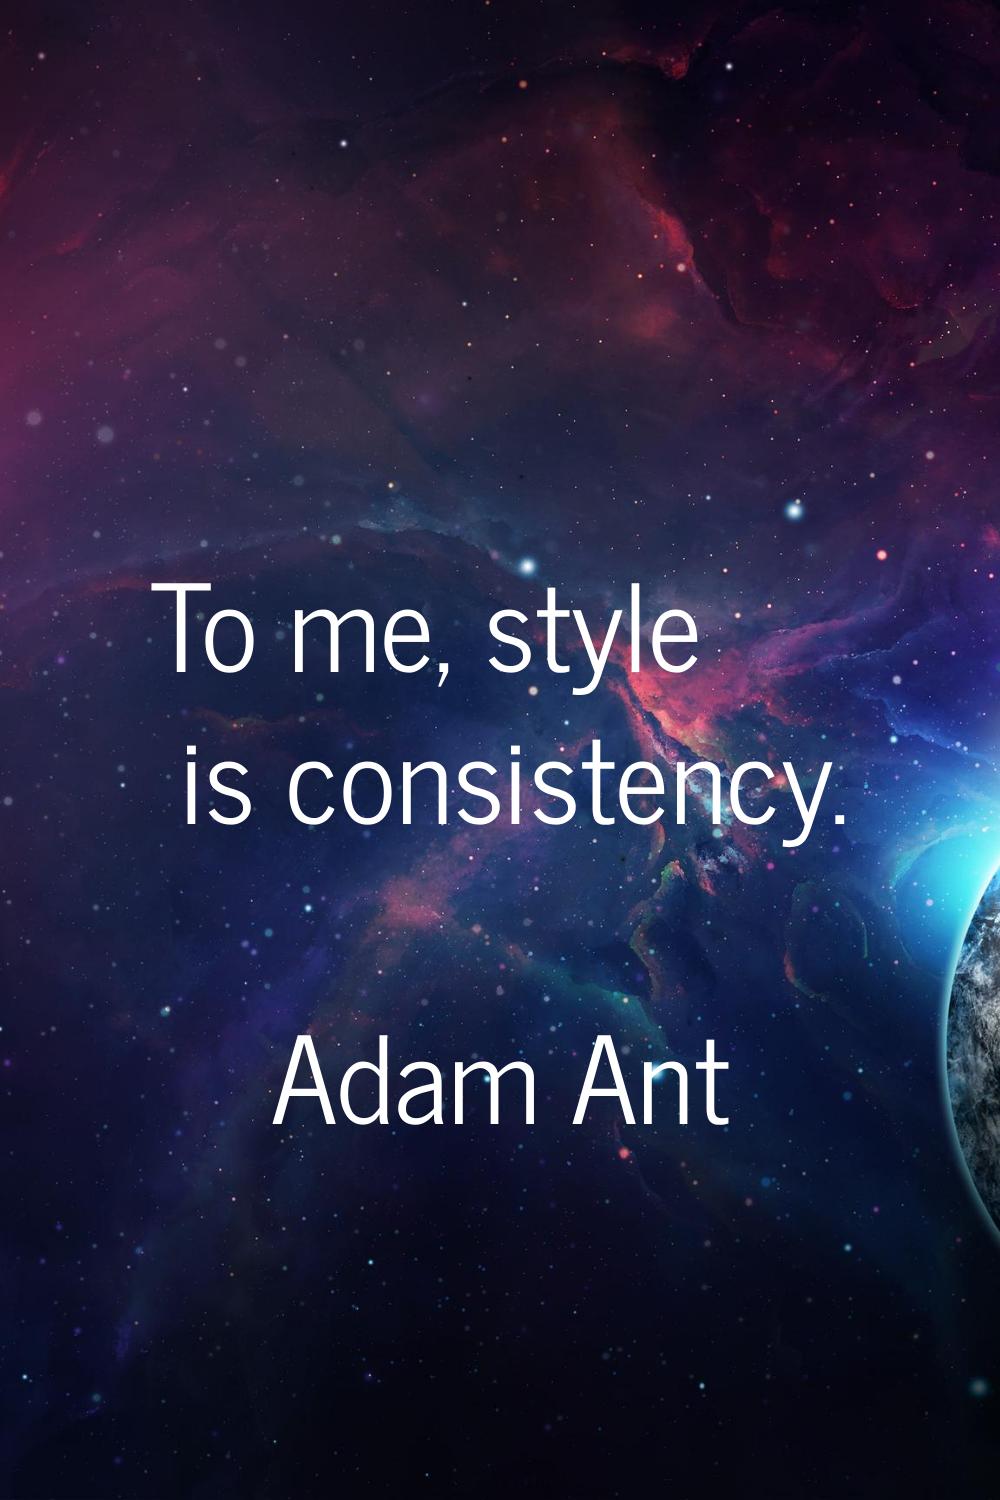 To me, style is consistency.